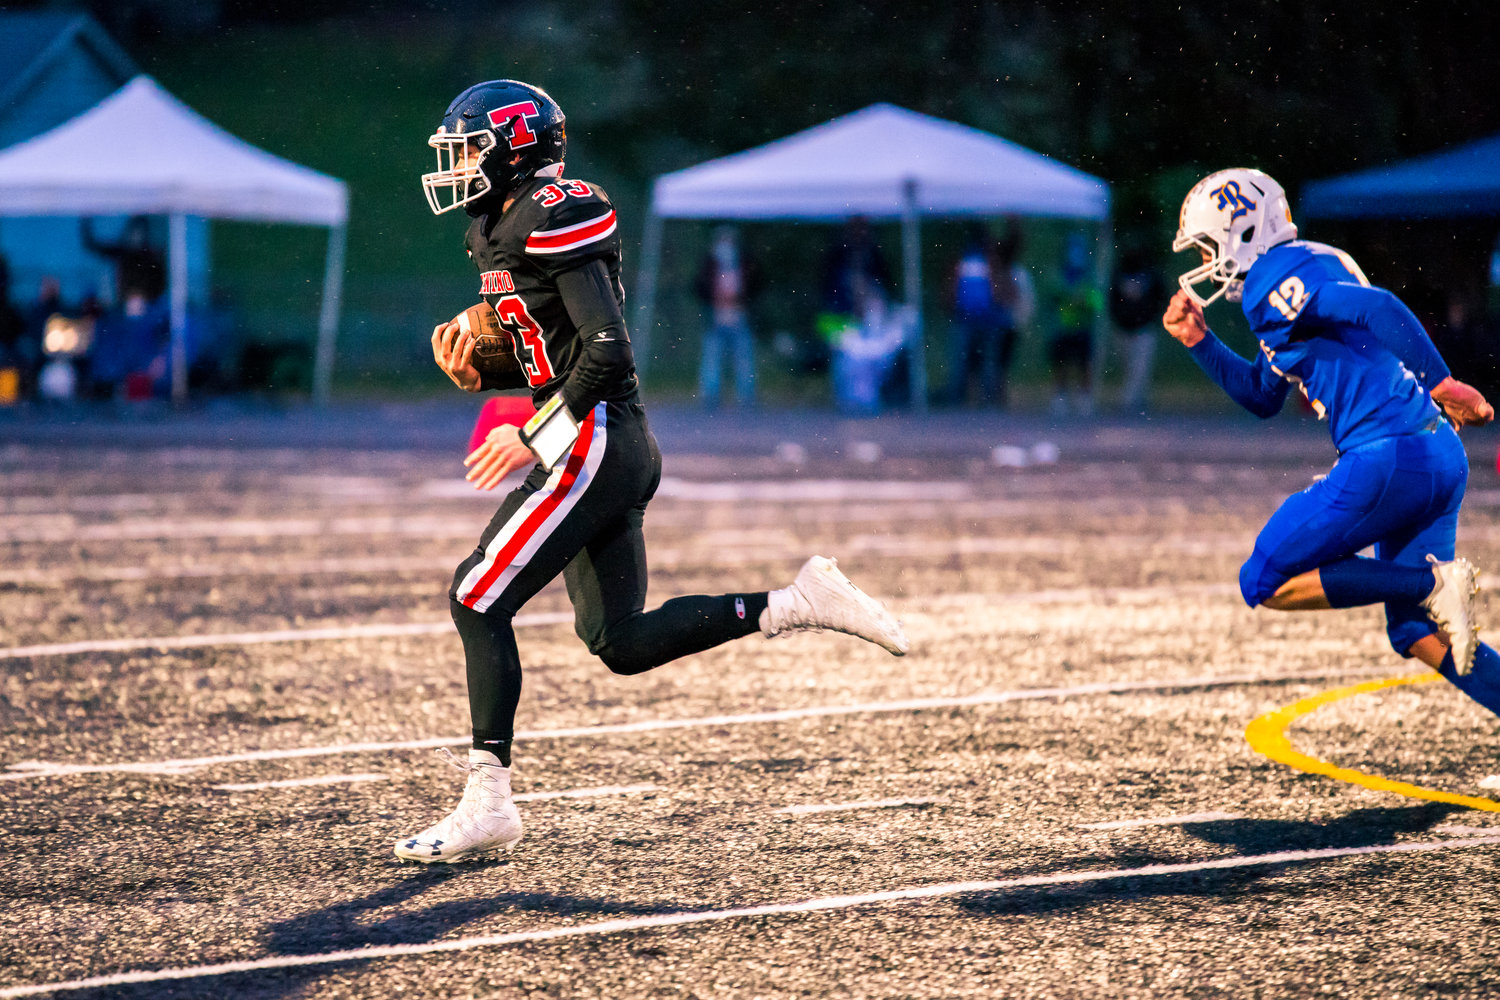 Tenino's Gavin Watson (33) runs with the football during a game against Rochester Friday night.